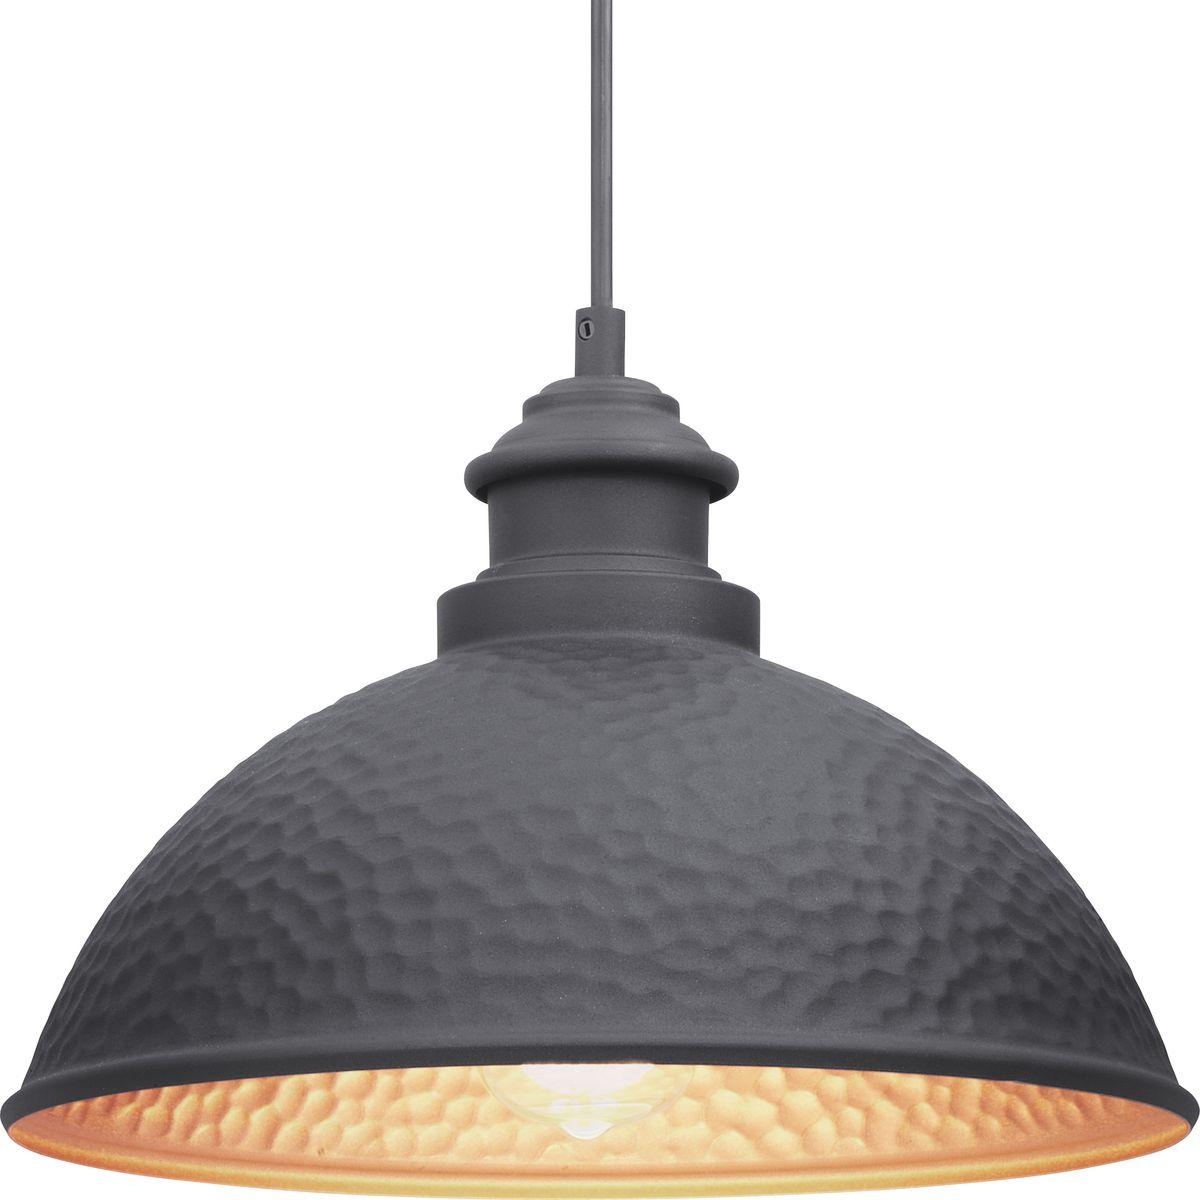 Hubbell P550032-031 Inspired by the warmth and beauty of hammered copper home accents, Englewood’s design displays elements of rustic craftsmanship. A one-light hanging lantern/pendant in Black with the inside of the shade that features a metallic copper coating of paint, of